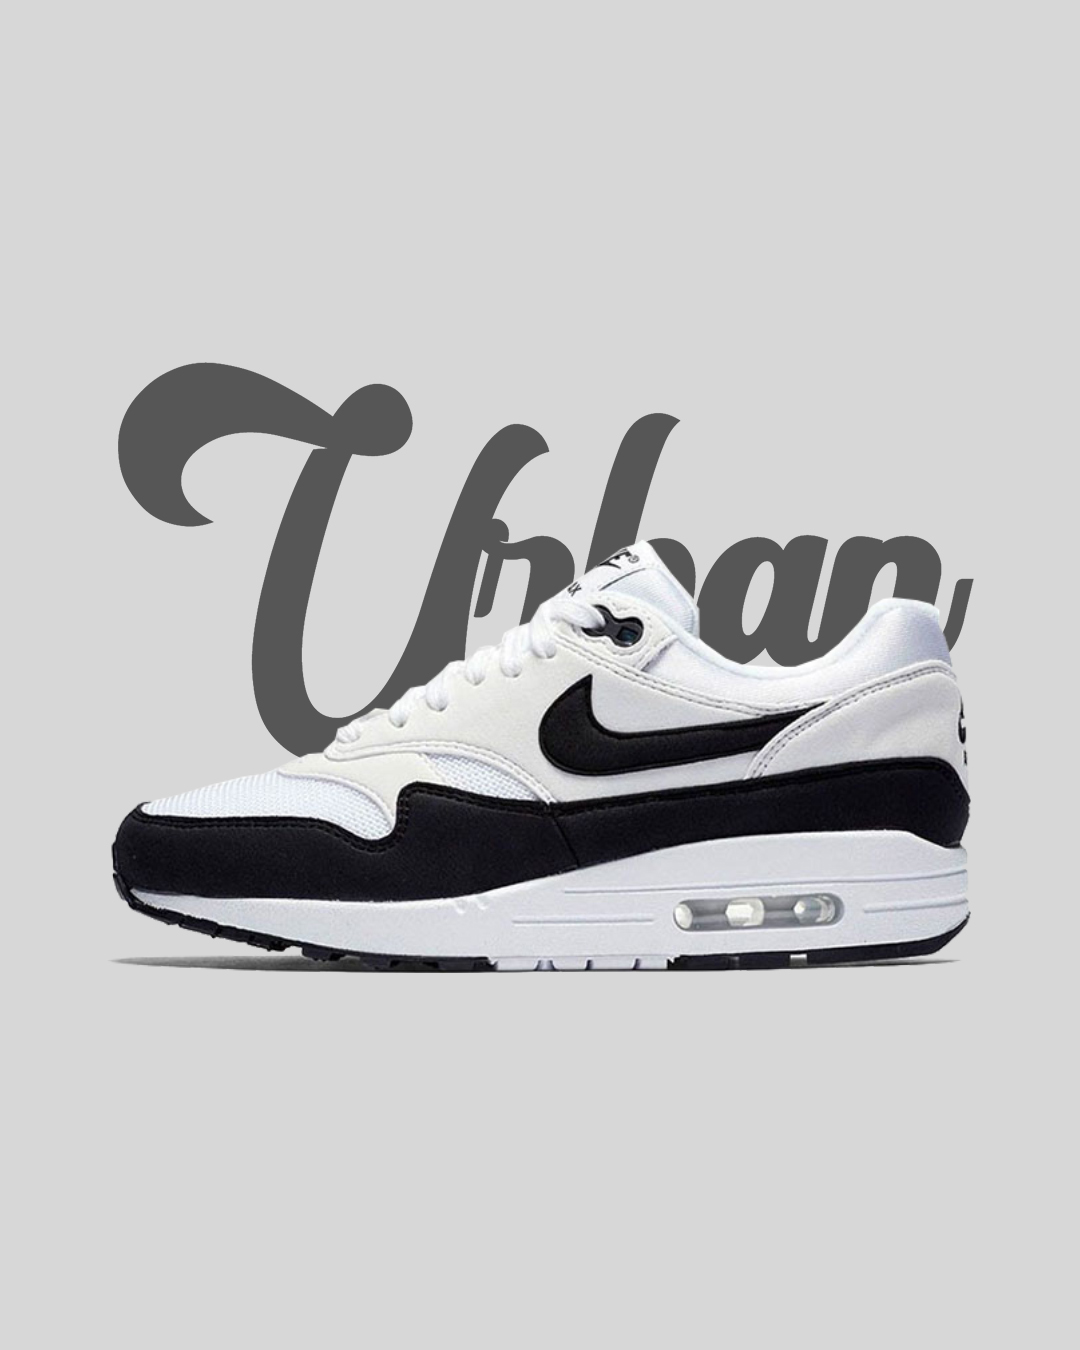 Nike Air Max 1 Black and white – Urban Collection